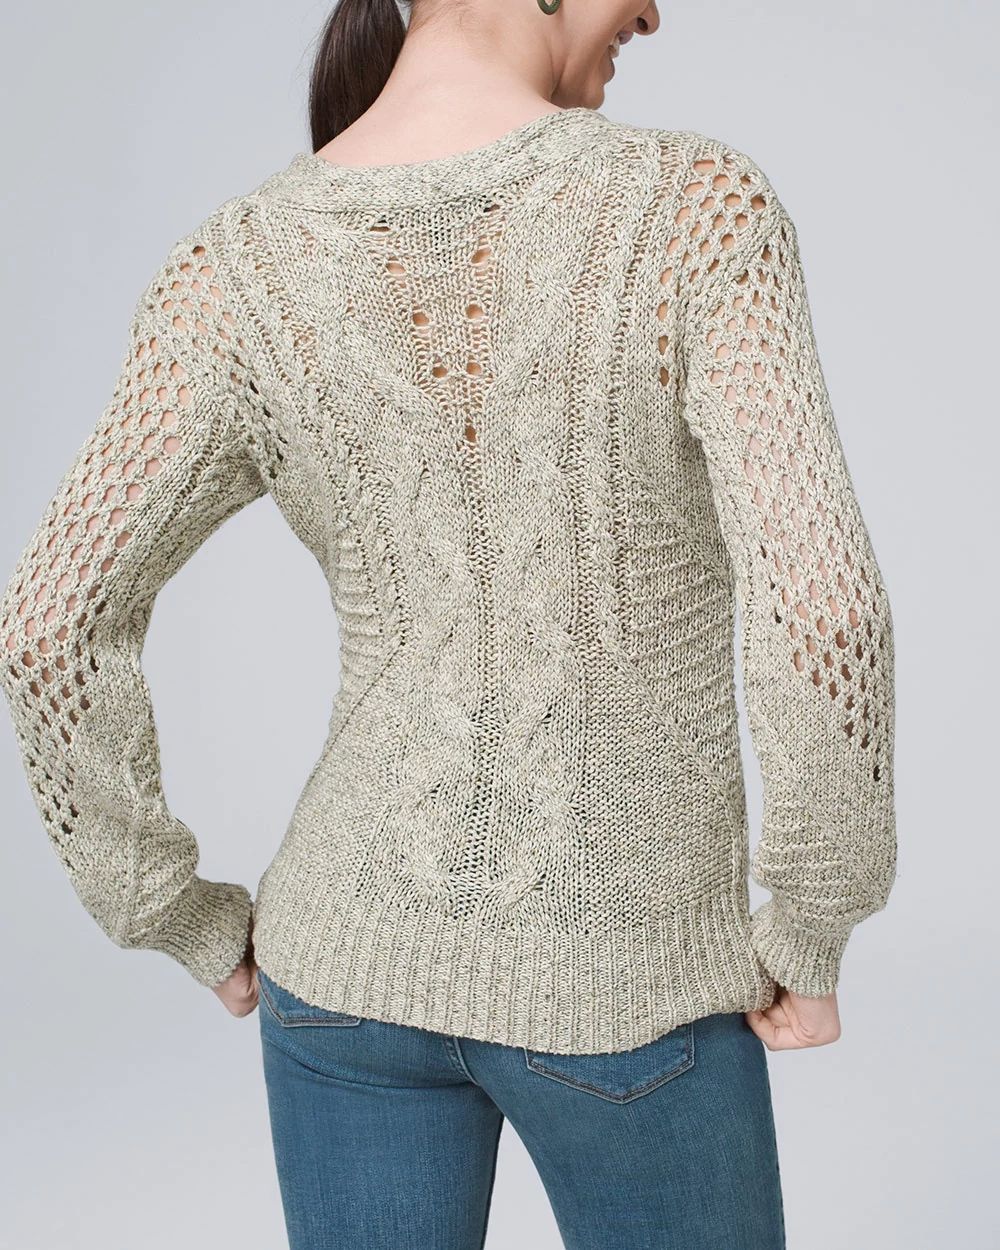 Stitchy Marled Pullover Sweater click to view larger image.